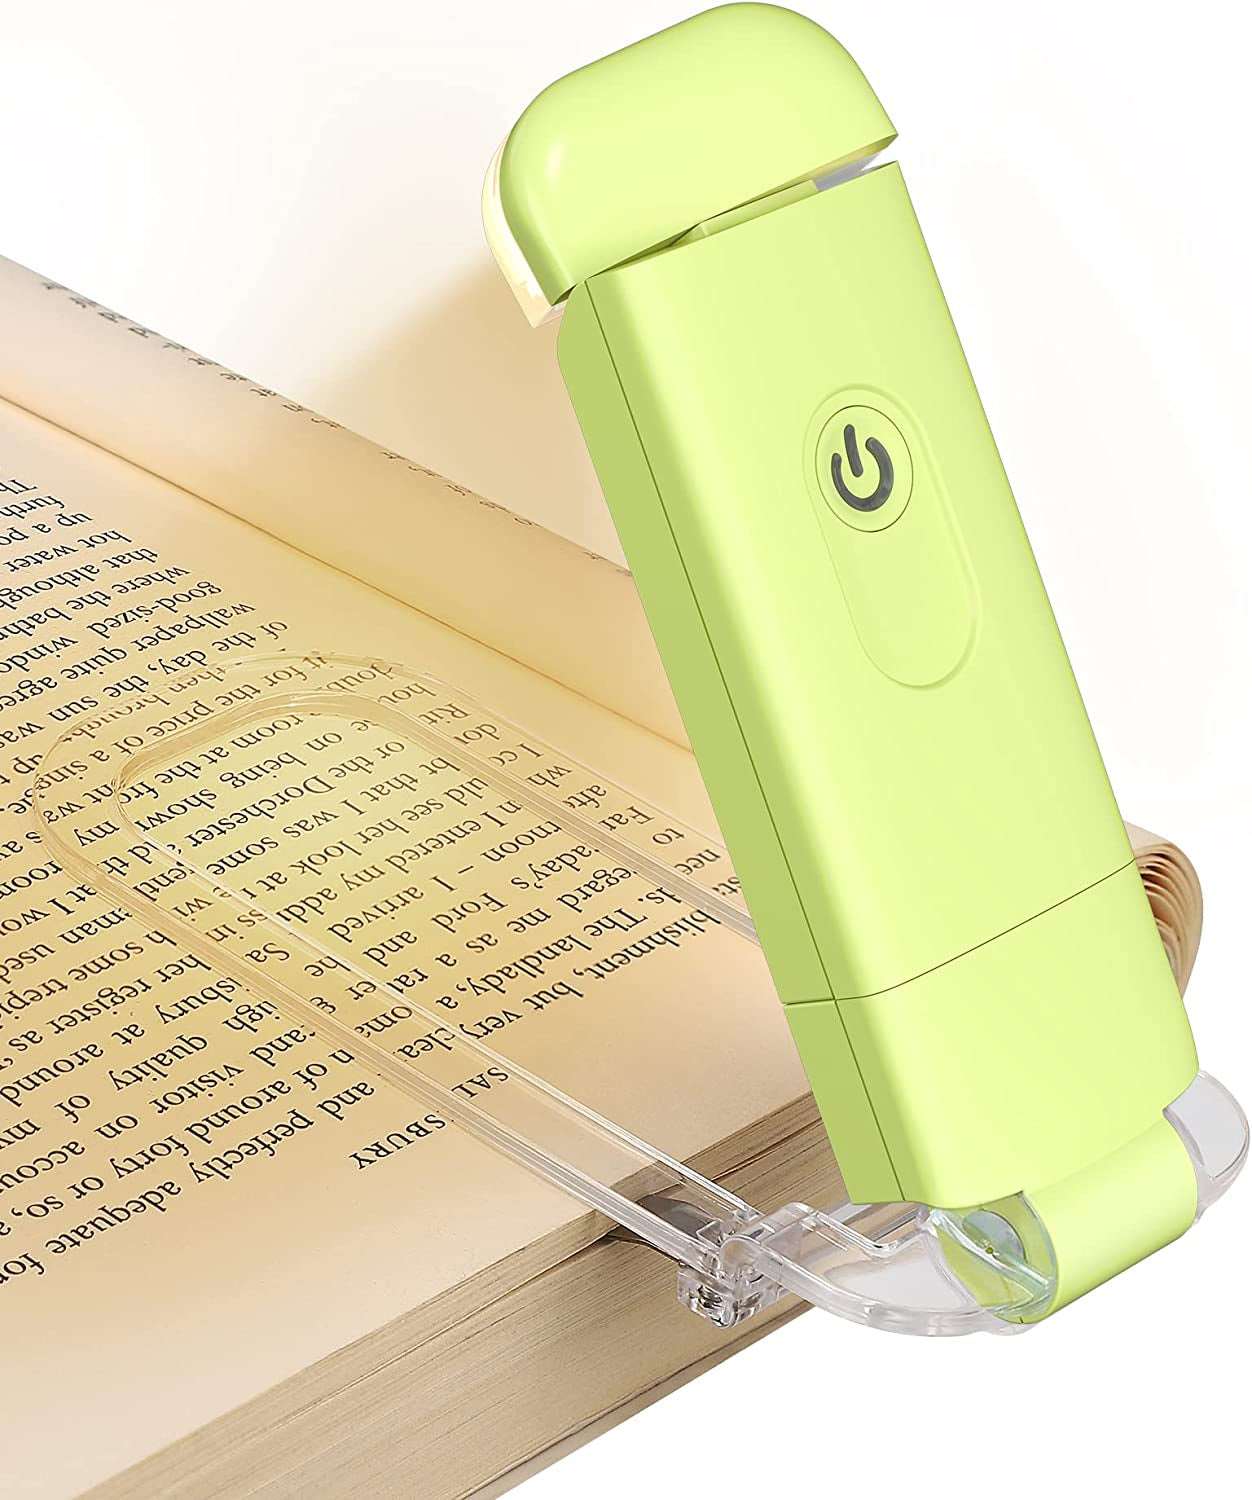 USB Rechargeable Book Reading Light, Warm White, Brightness Adjustable for Eye-Protection, LED Clip on Book Lights, Portable Bookmark Light for Reading in Bed, Car (White)